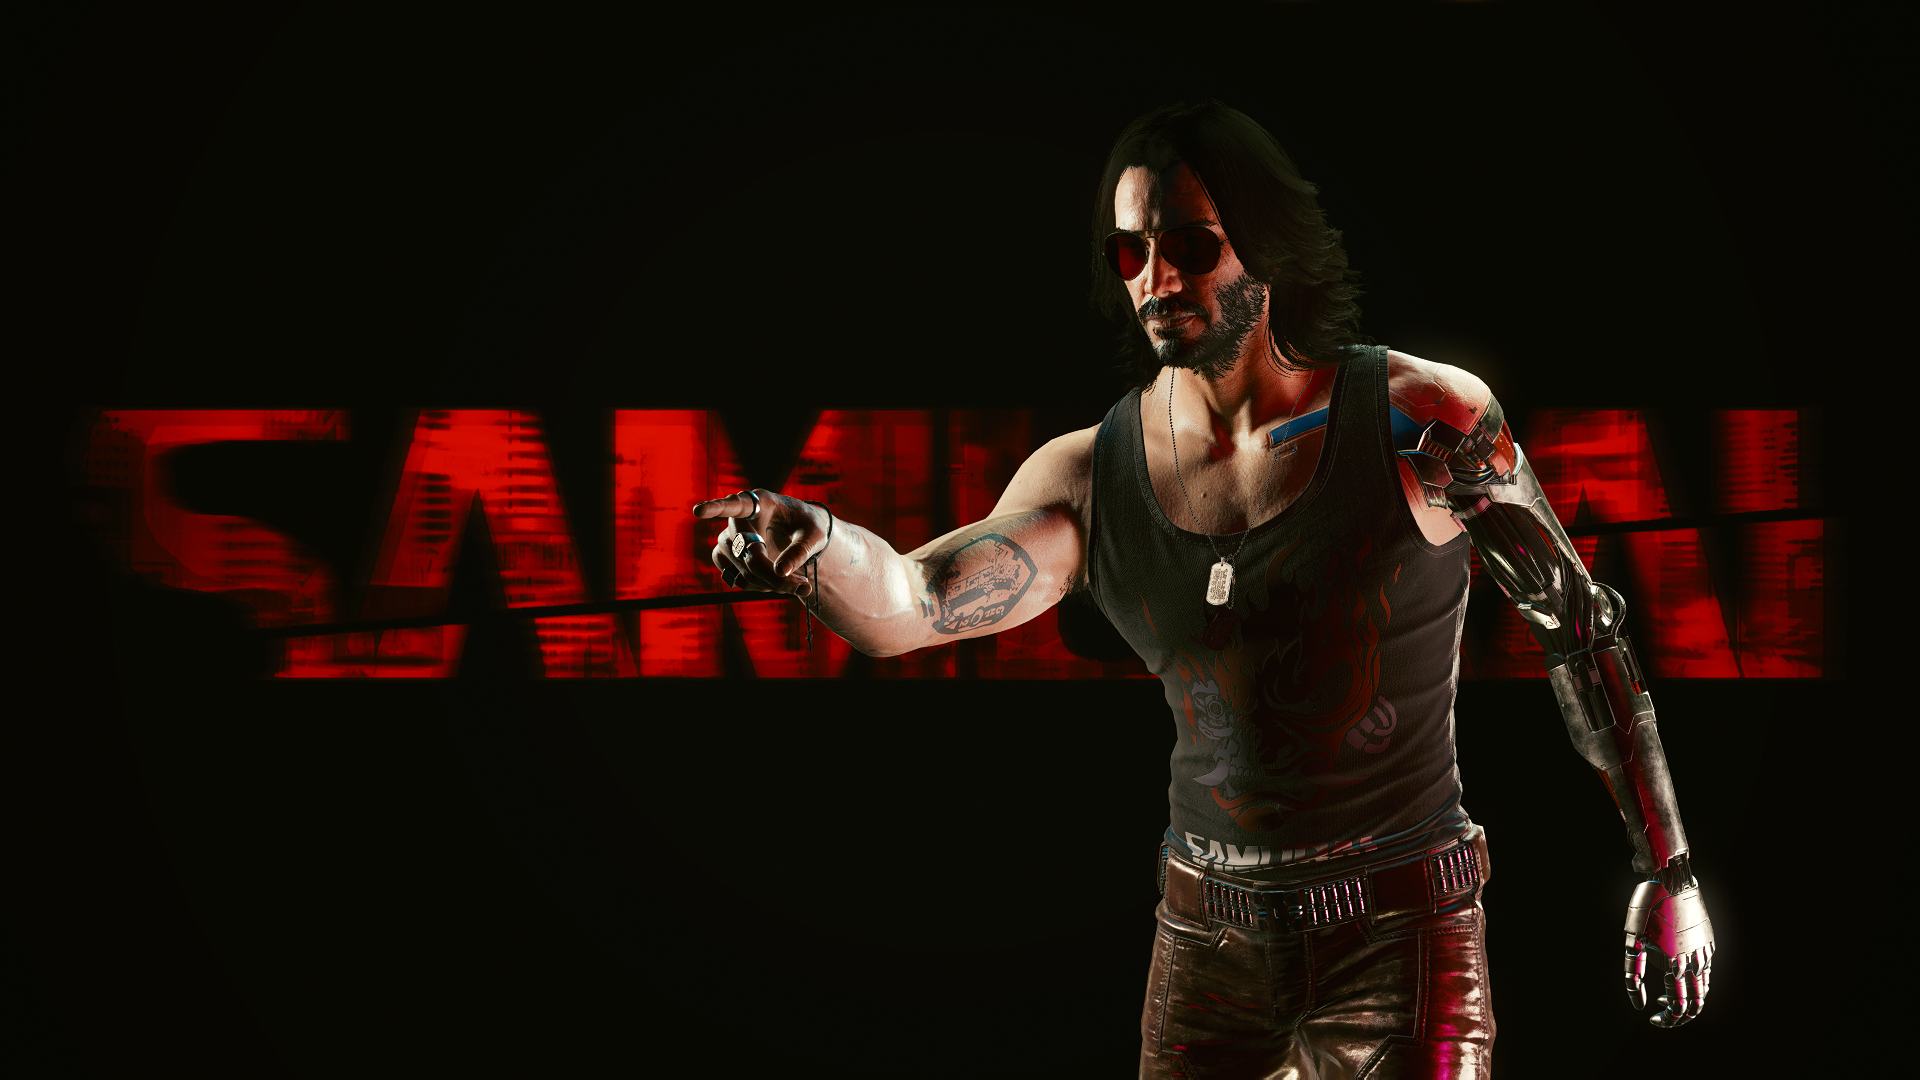 General 1920x1080 Cyberpunk 2077 Keanu Reeves video games CD Projekt RED Johnny Silverhand cyberpunk actor video game characters